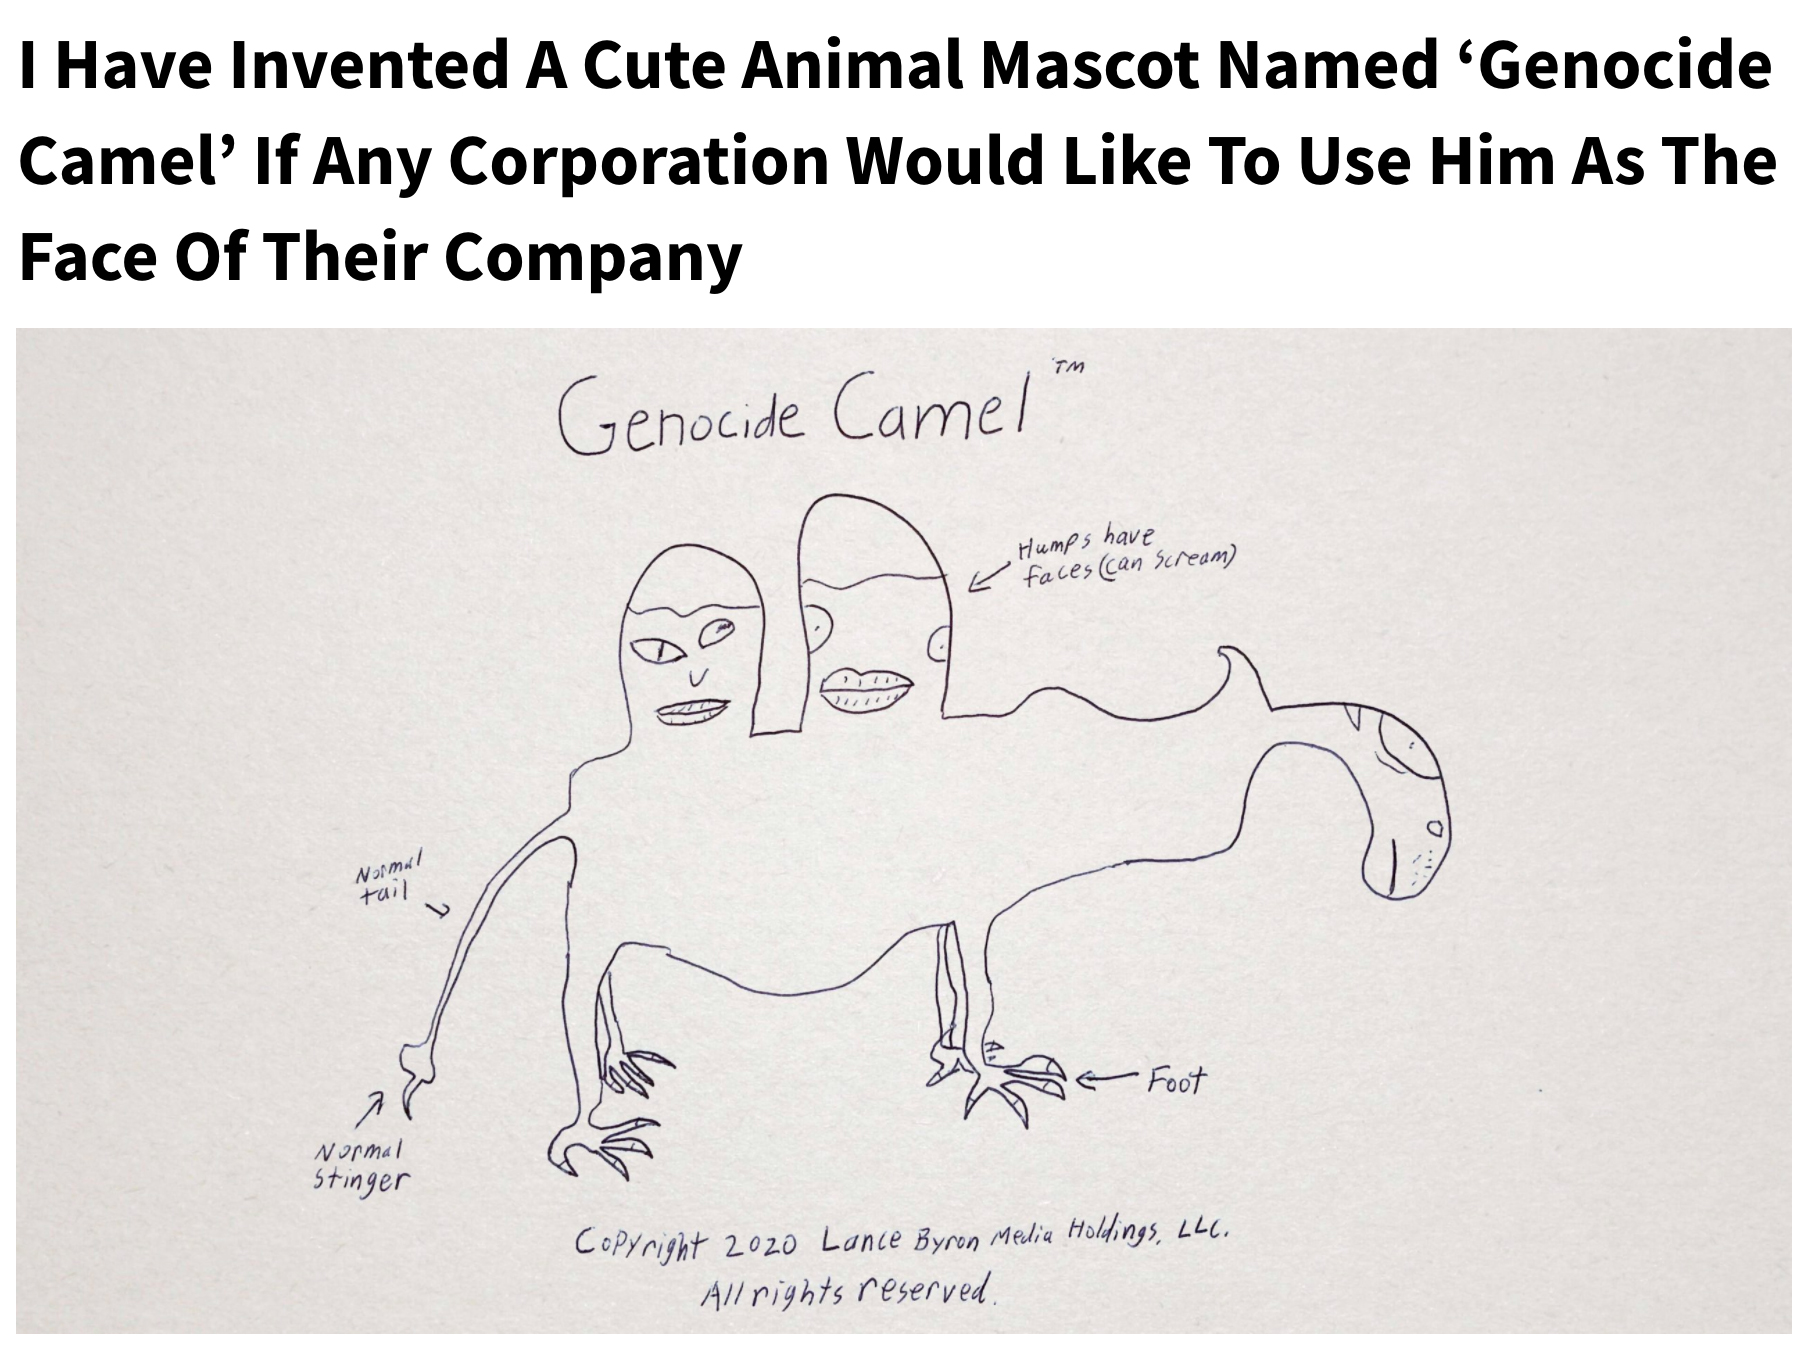 clickhole headlines - I Have Invented A Cute Animal Mascot Named 'Genocide Camel' If Any Corporation Would To Use Him As The Face Of Their Company